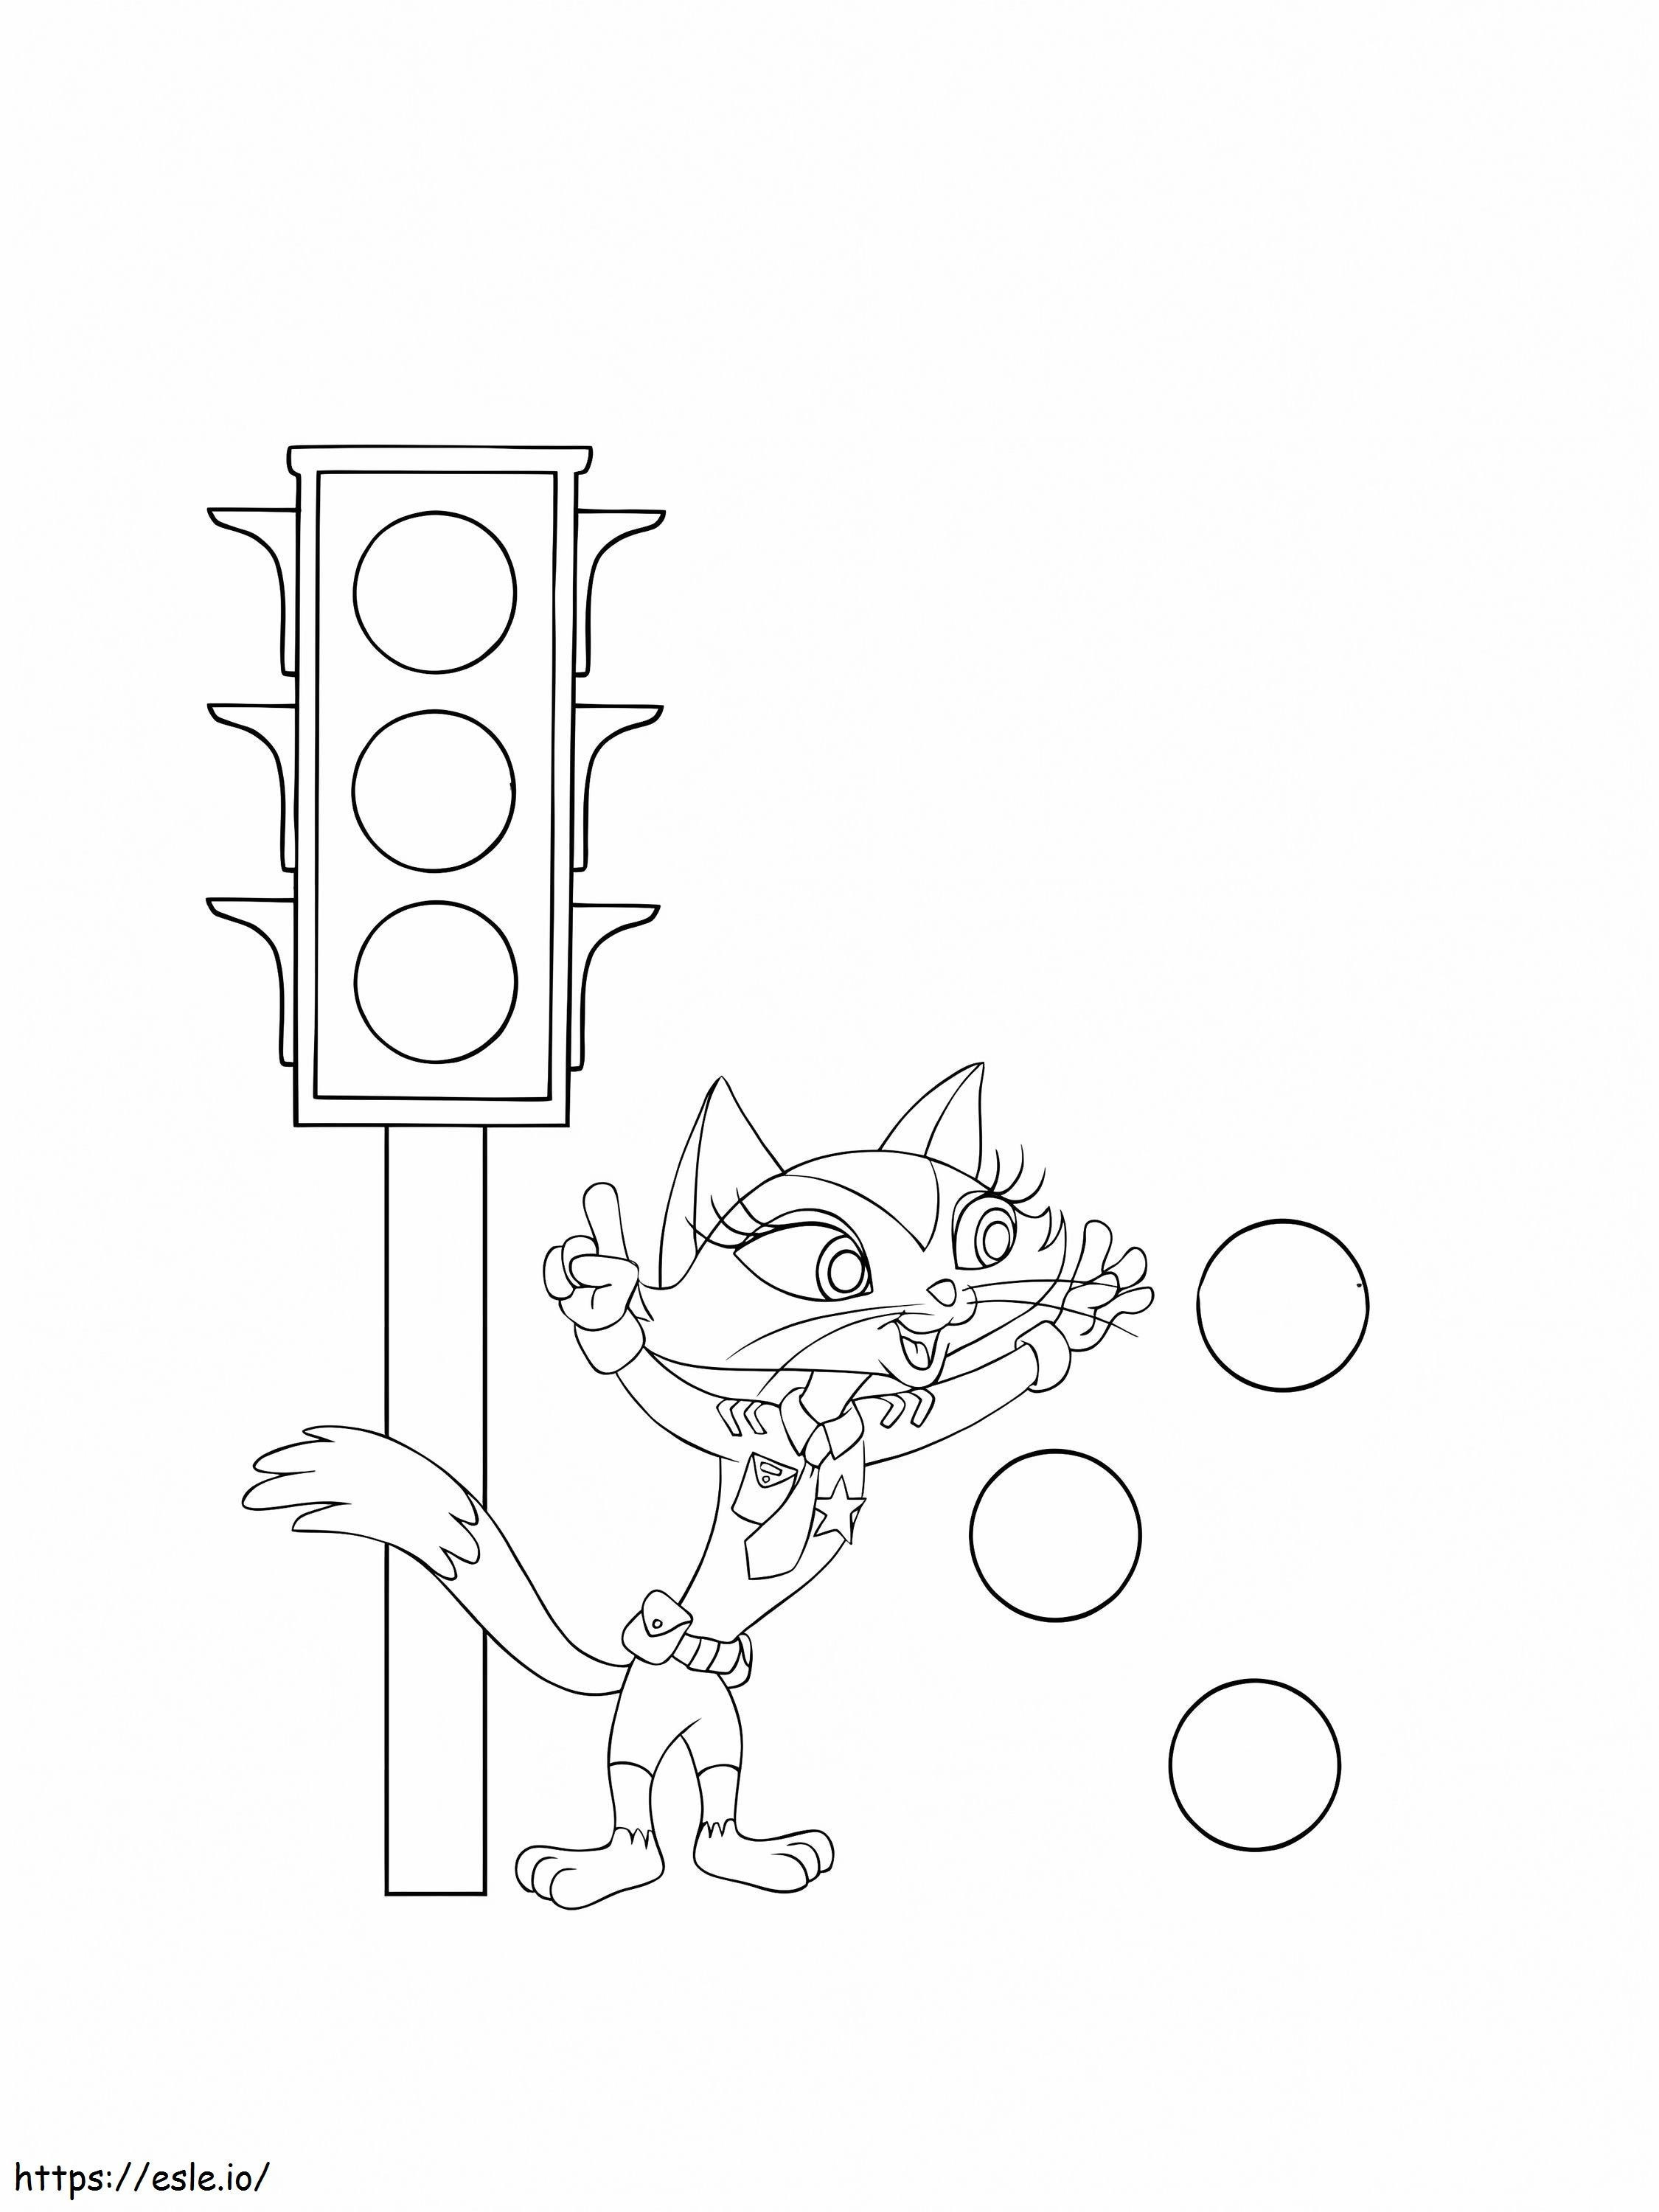 Police Cat And Traffic Light coloring page